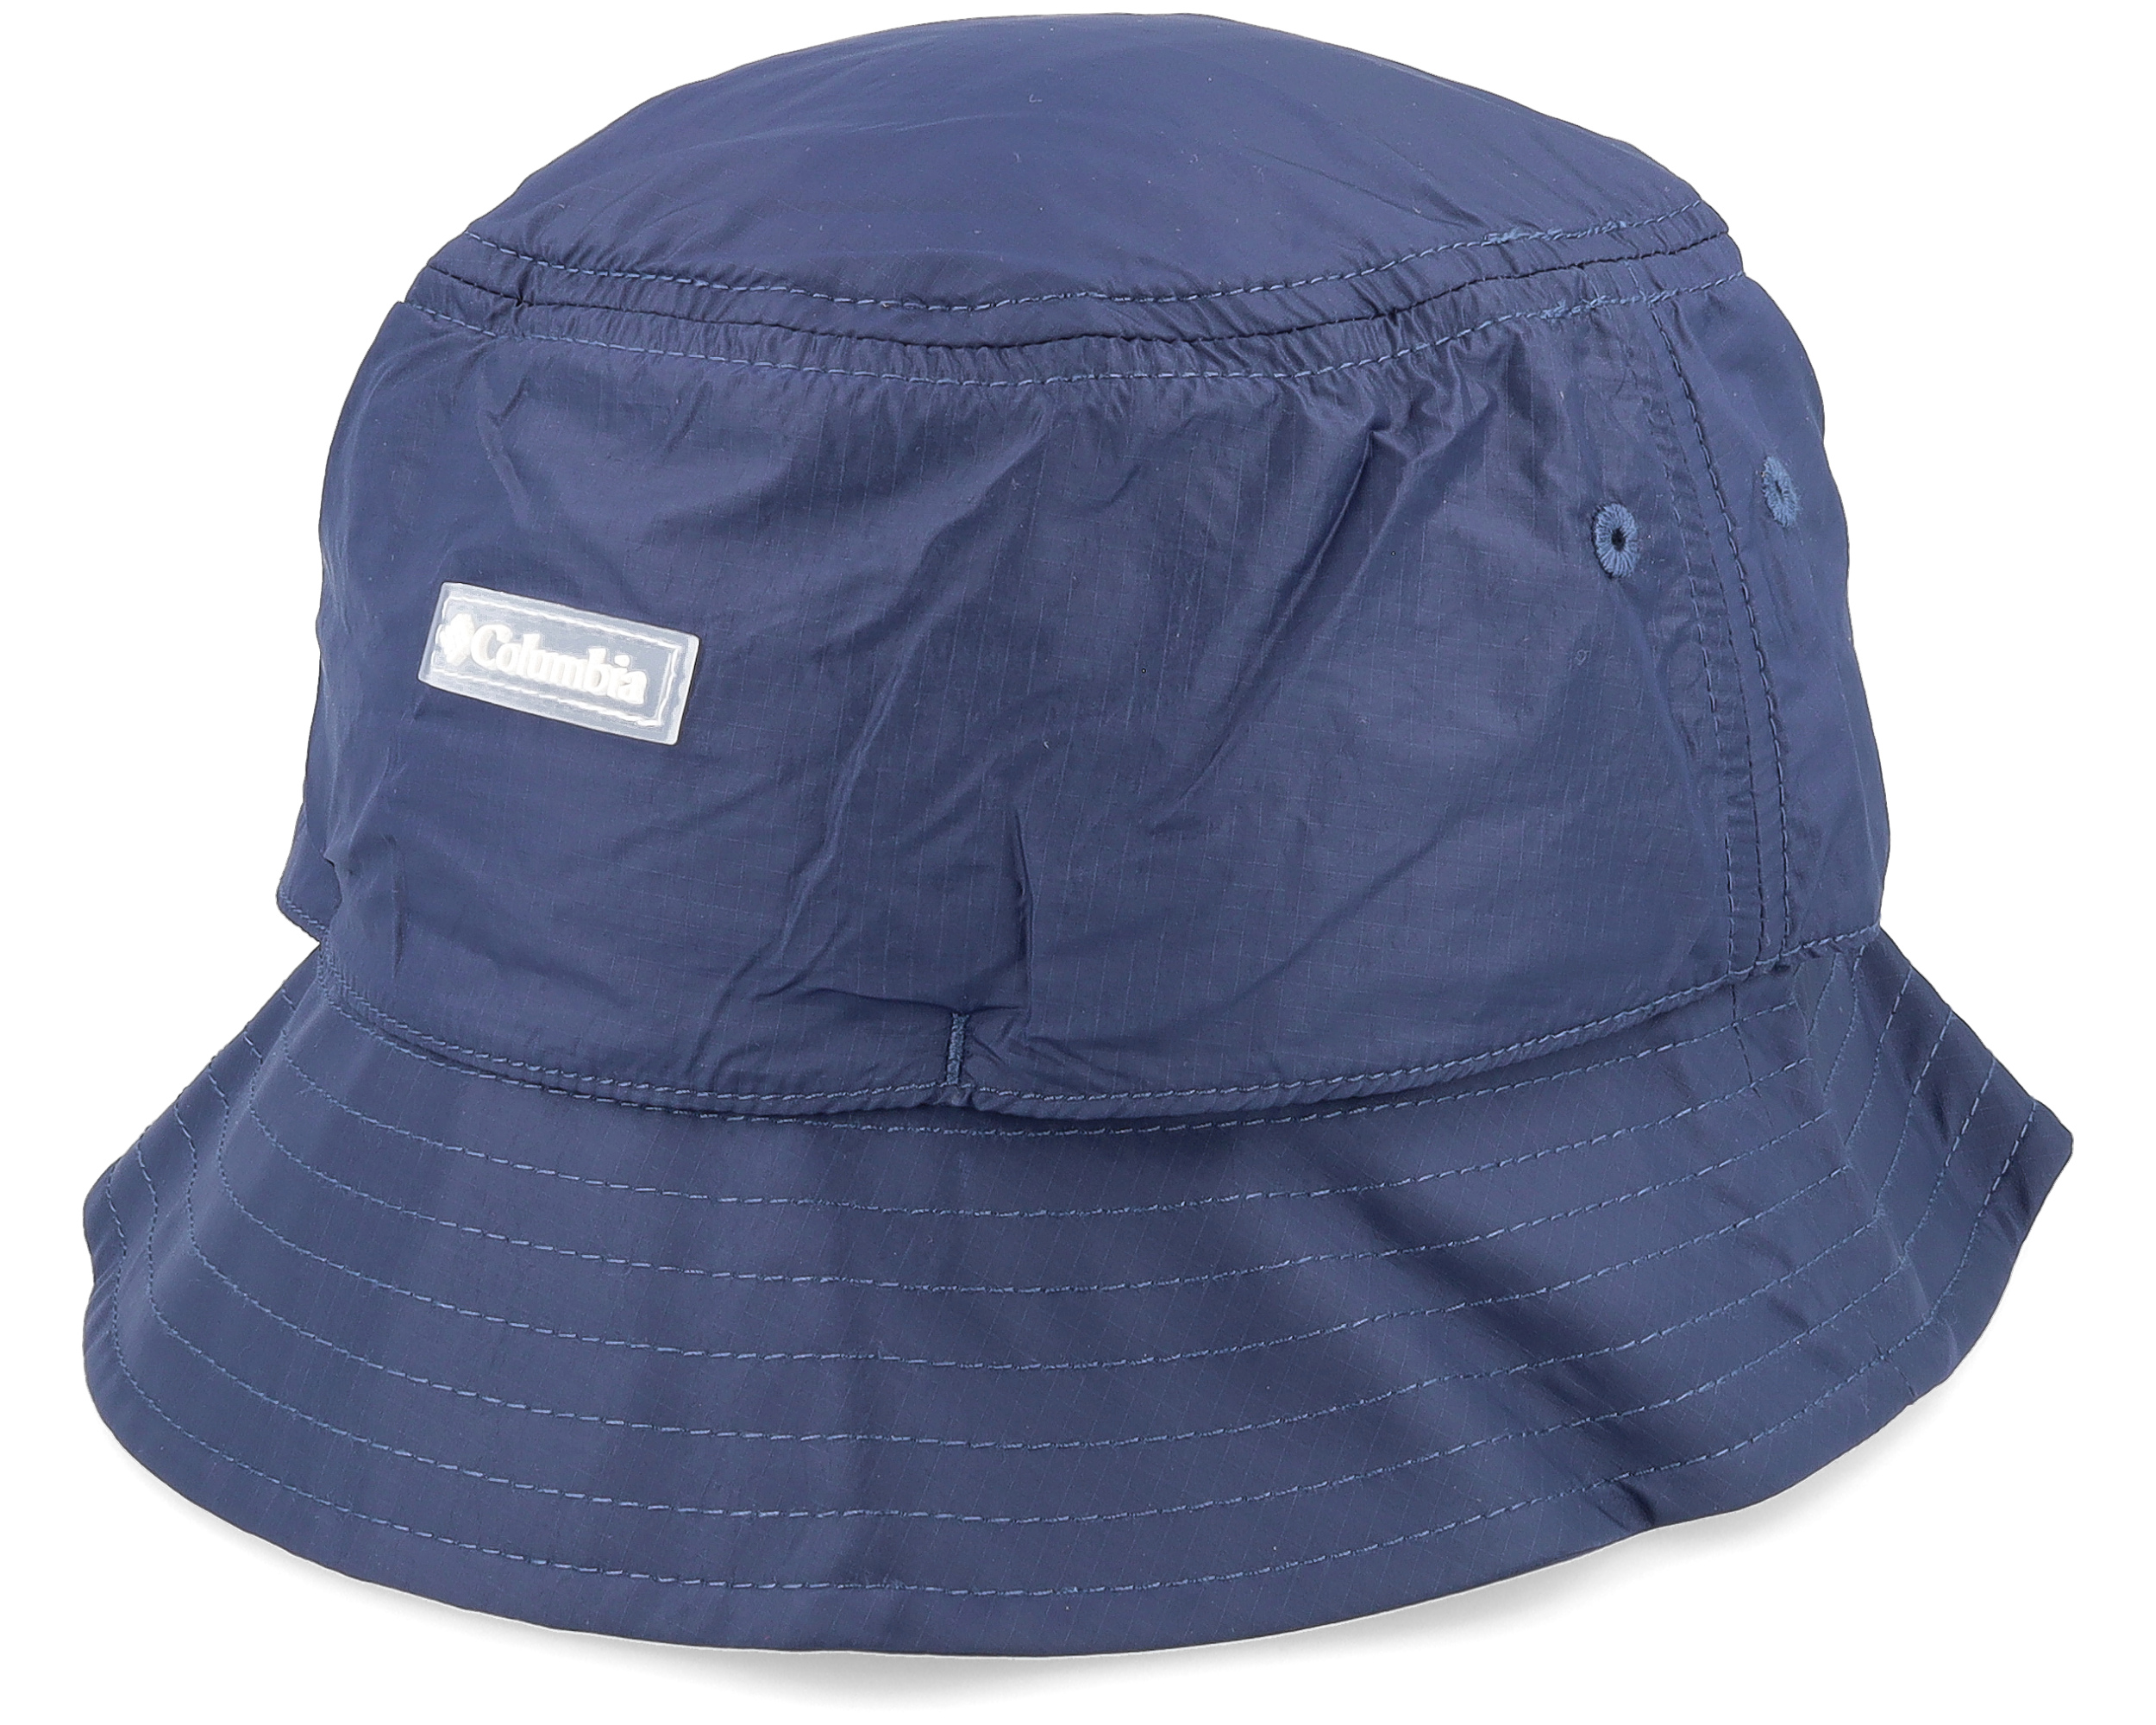 Punchbowl Vented Nocturnal Ripst Navy Bucket - Columbia hat